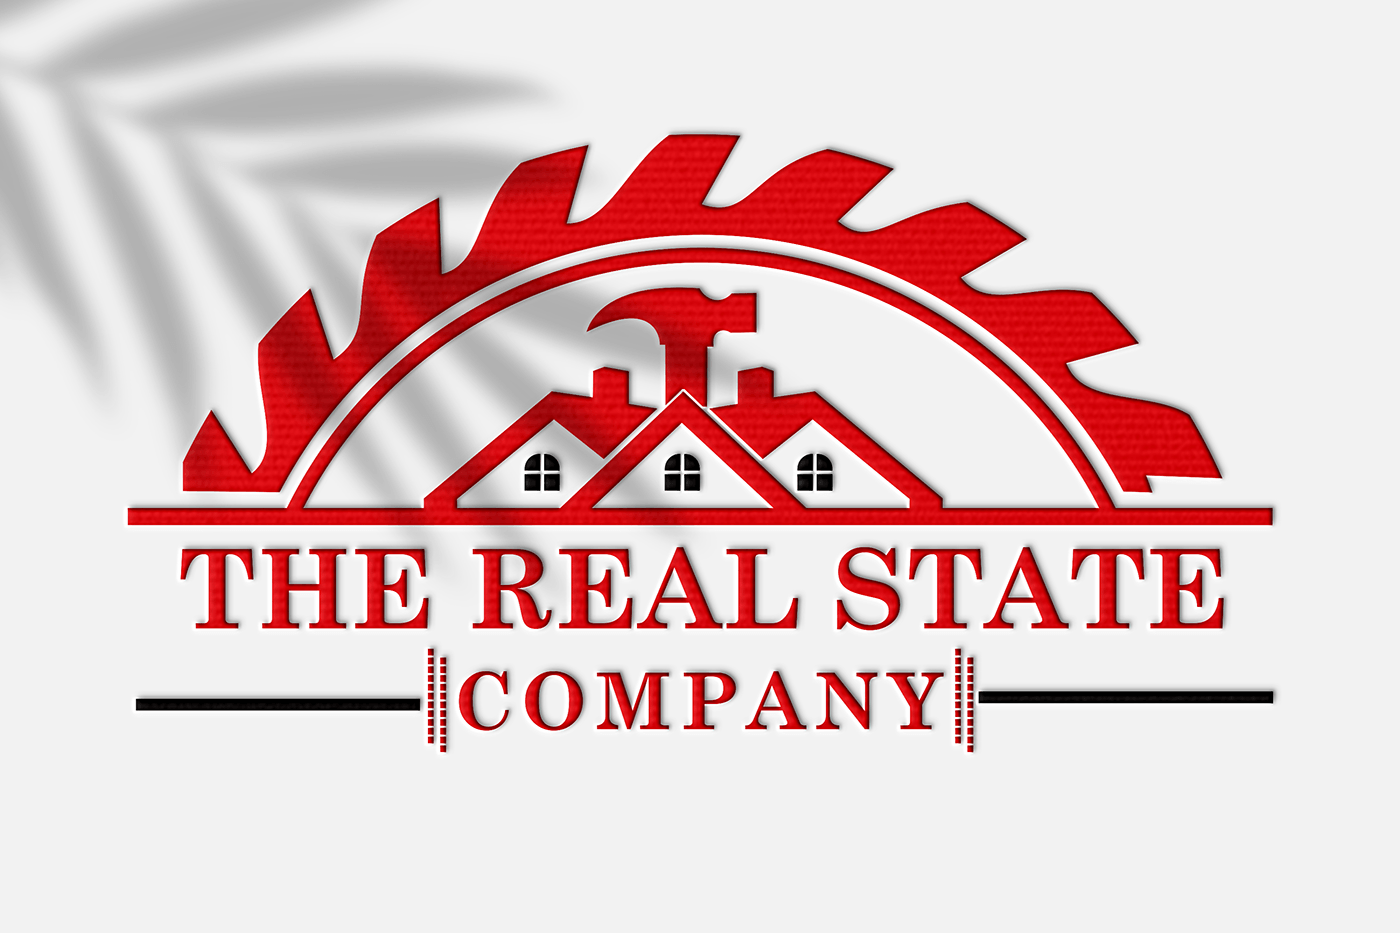 The real state company 